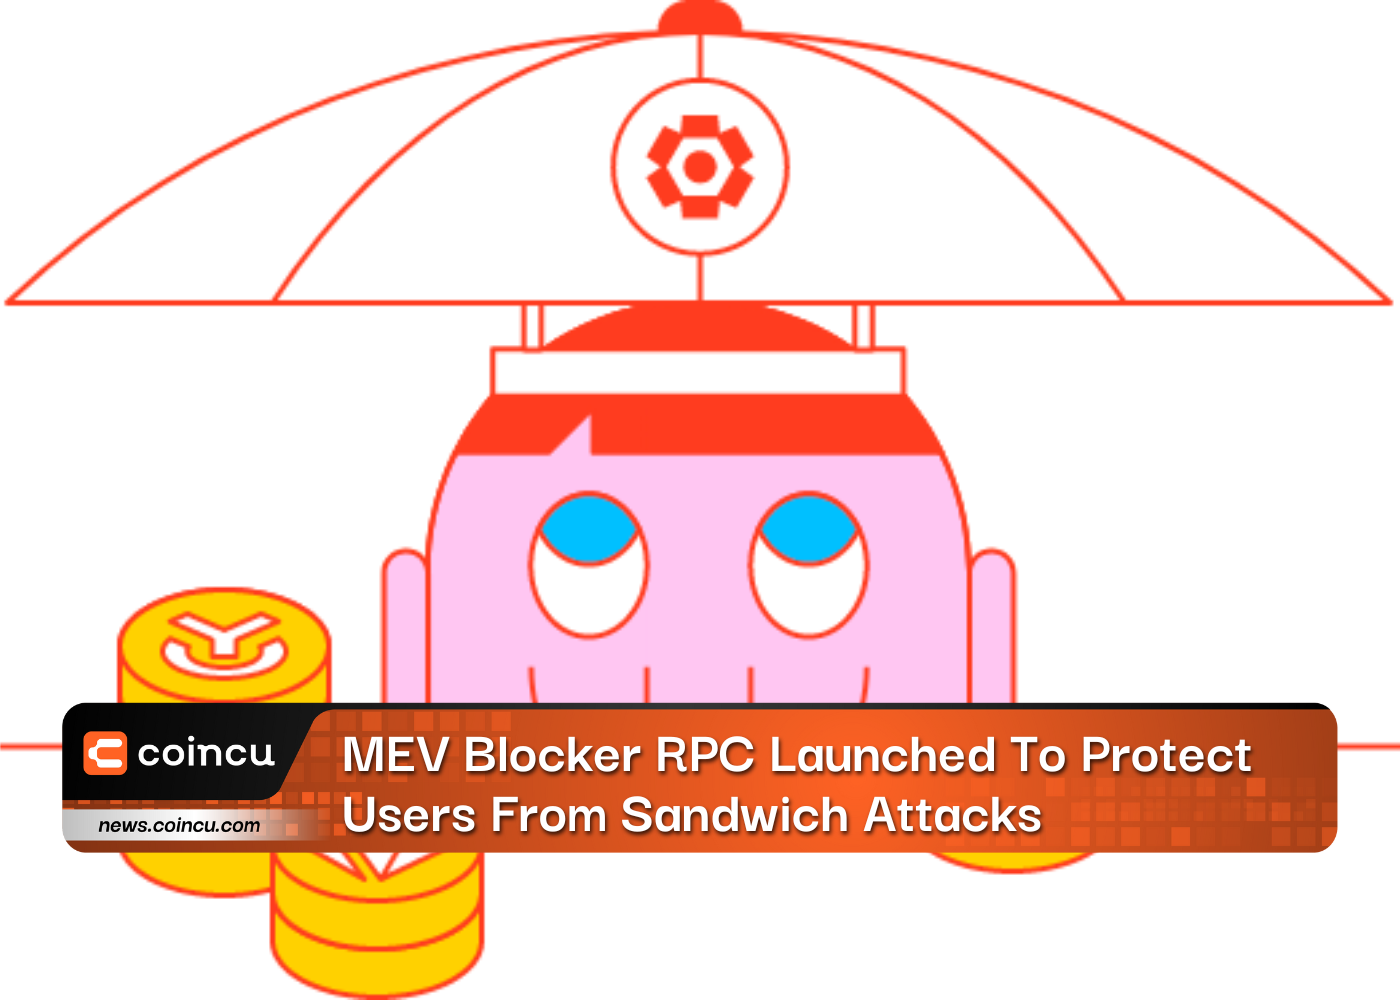 MEV Blocker RPC Launched To Protect Users From Sandwich Attacks